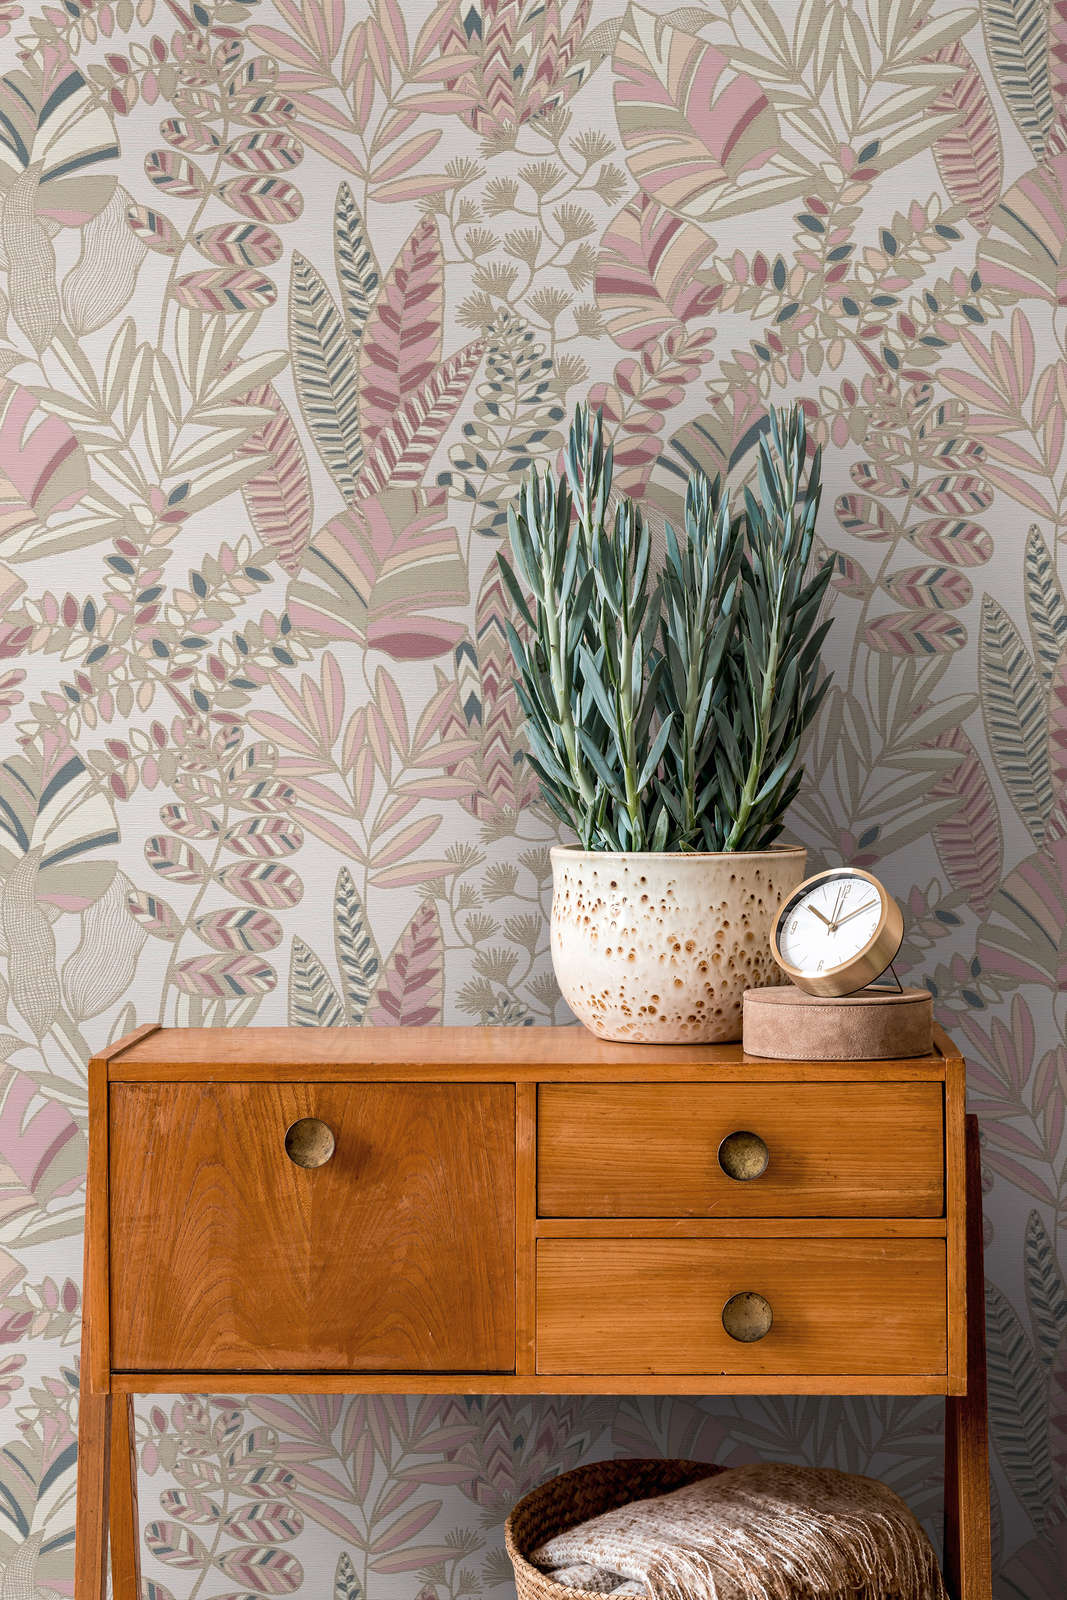             Non-woven wallpaper with large leaves in a light sheen - pink, white, gold
        